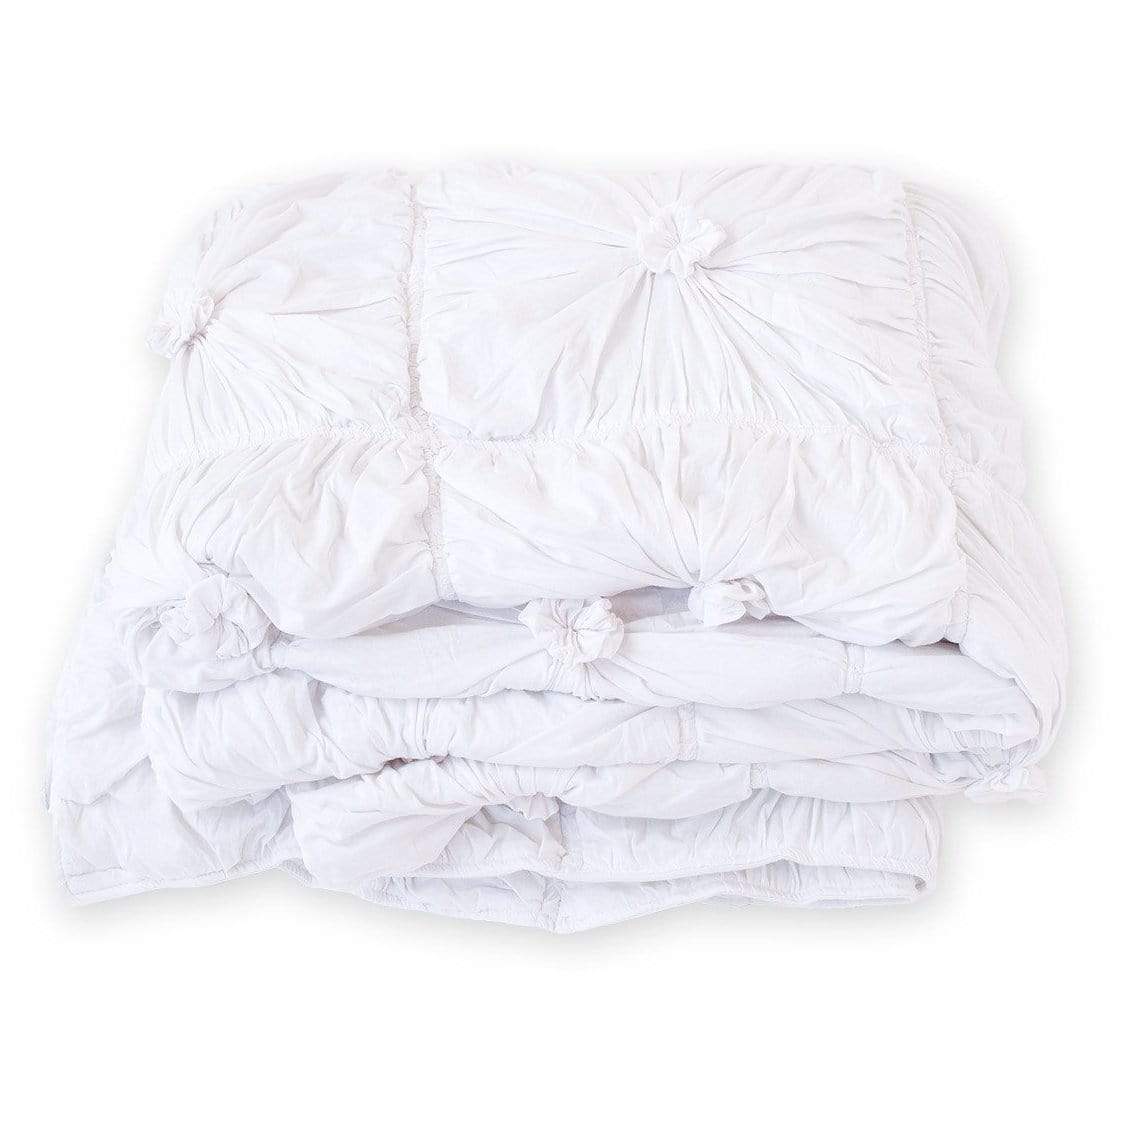 Lazybones Rosette Quilt - White Bedding and Bath